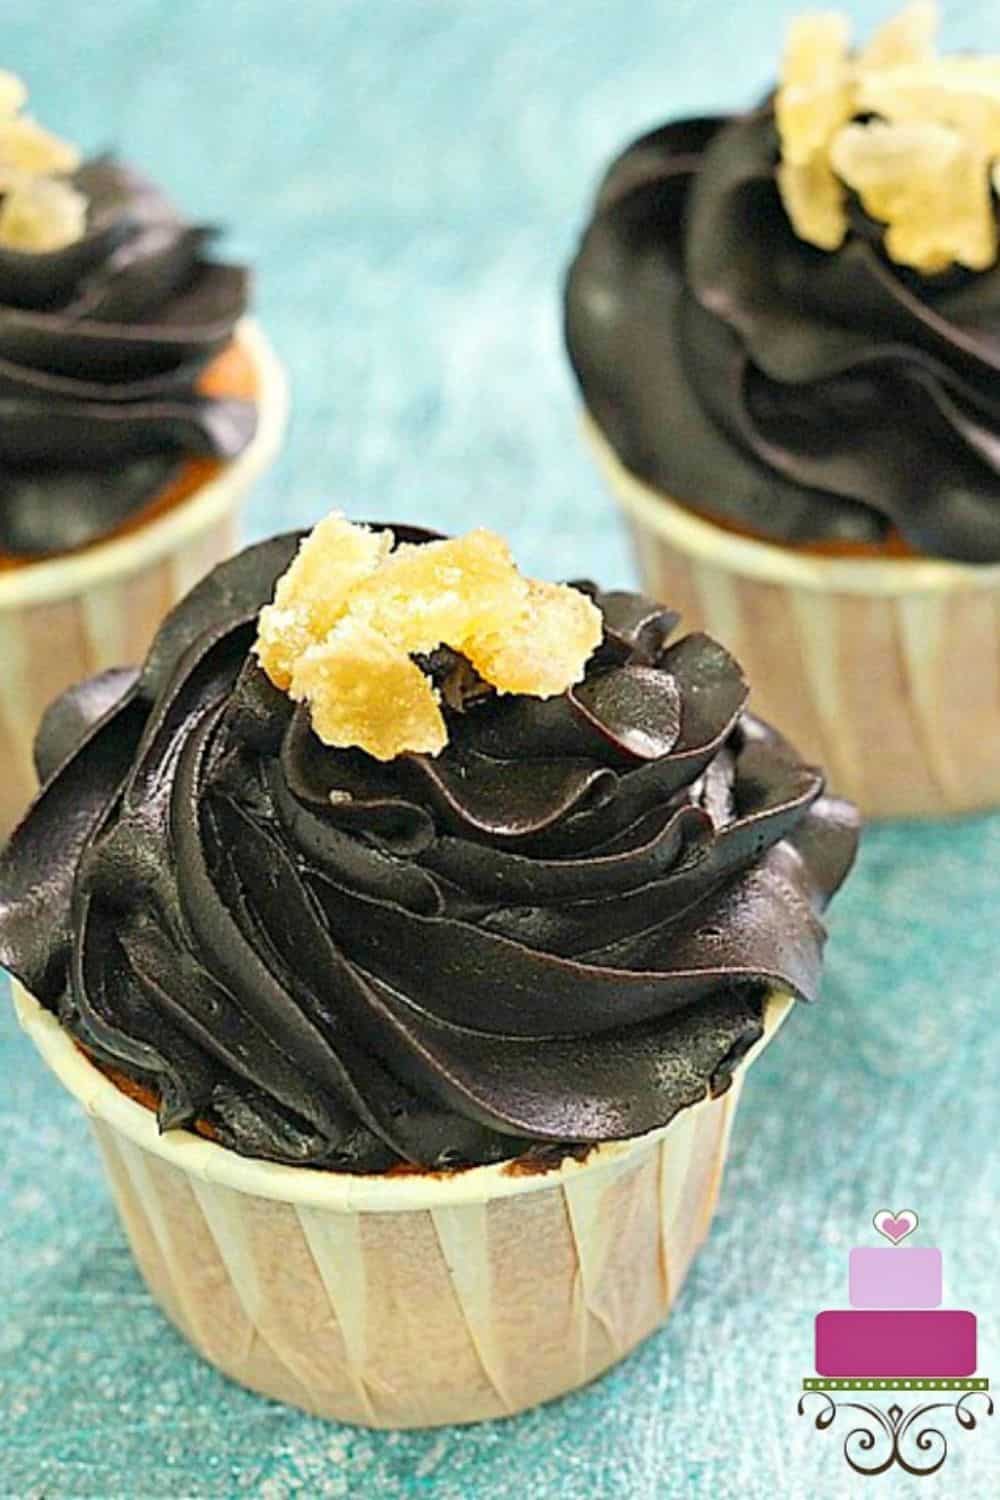 Cupcakes with chocolate topping and candied ginger